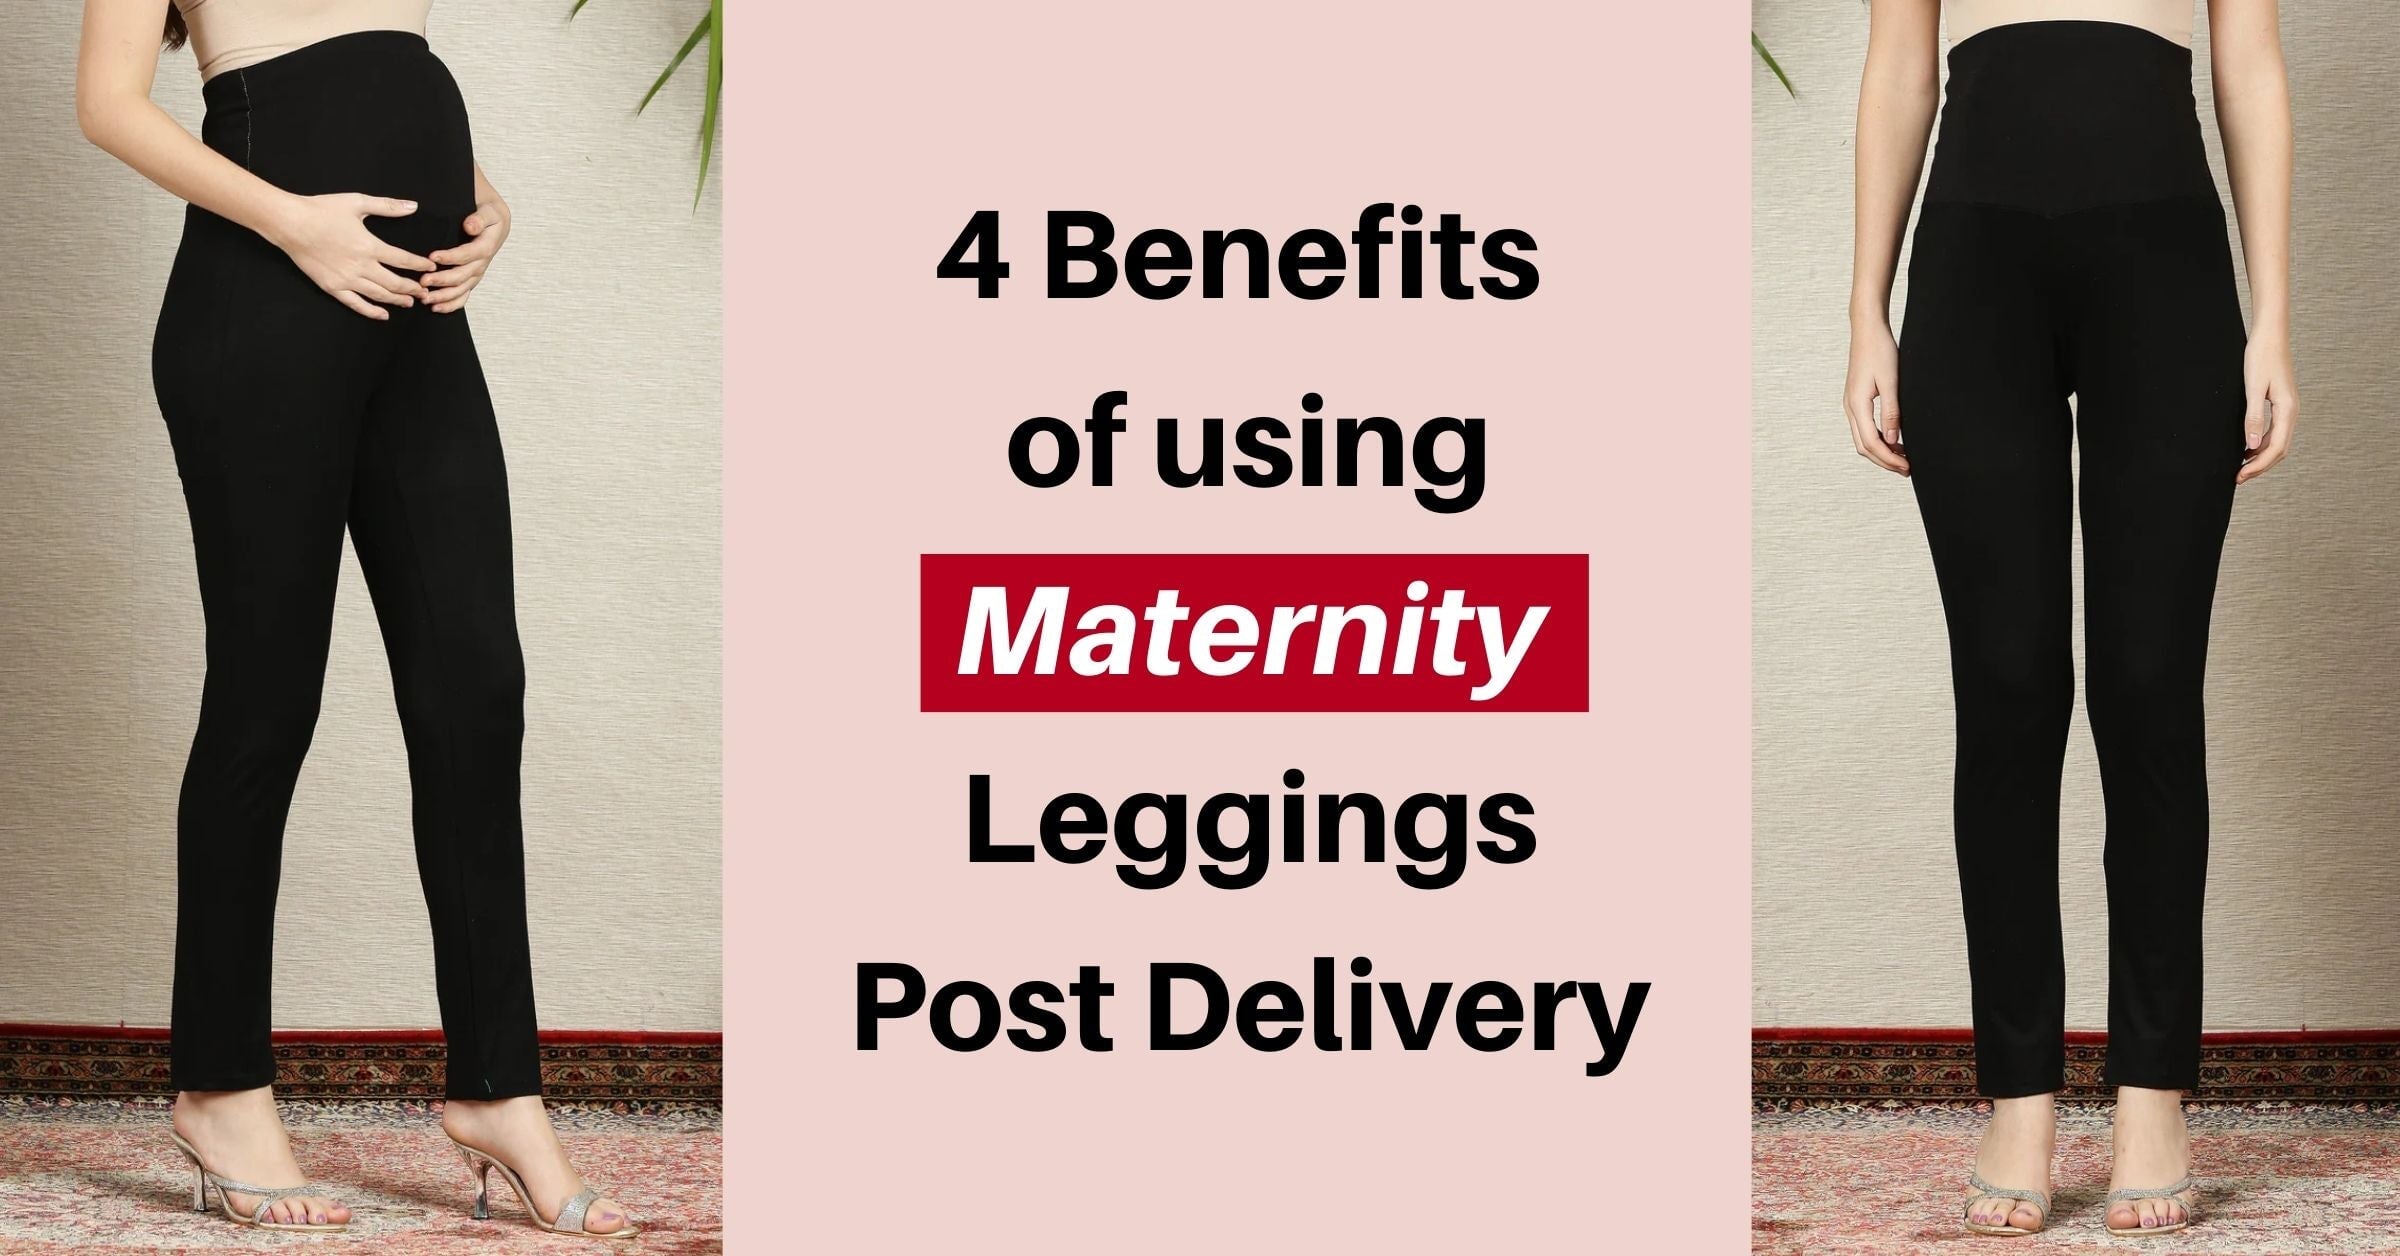 4 Benefits of using Maternity Leggings Post Delivery